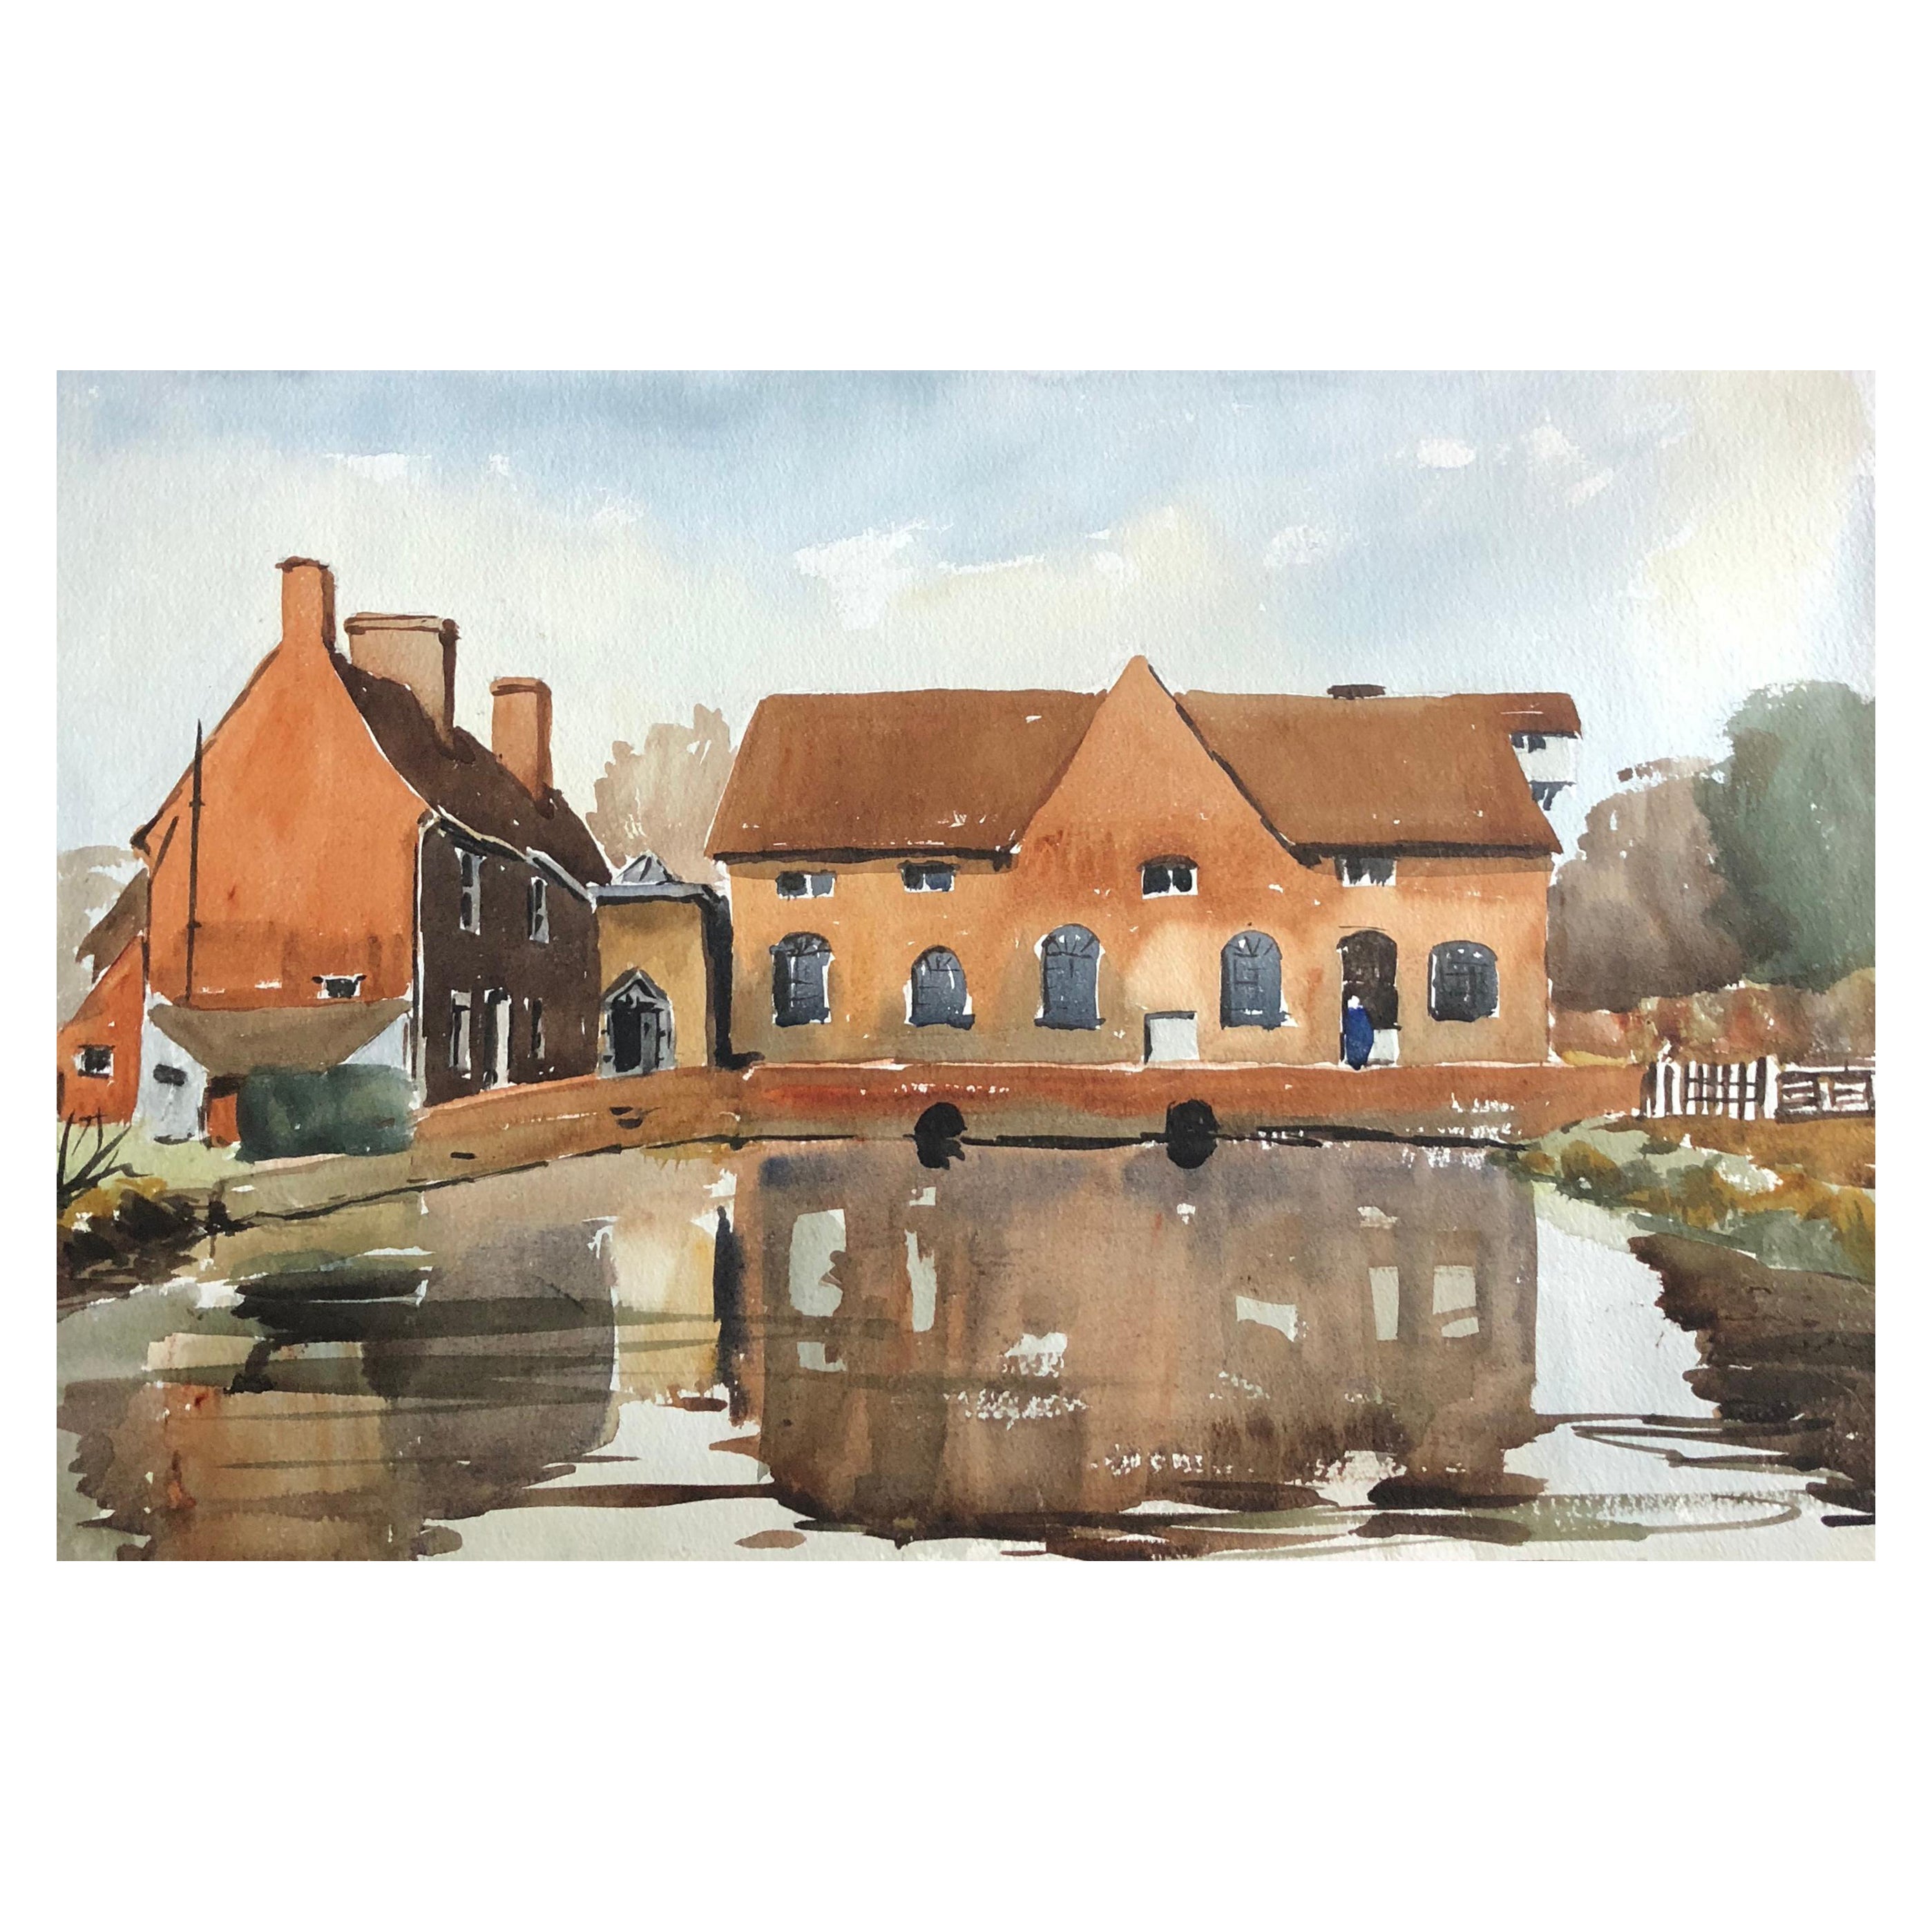 Trafford Mill, Original British Watercolour Painting For Sale